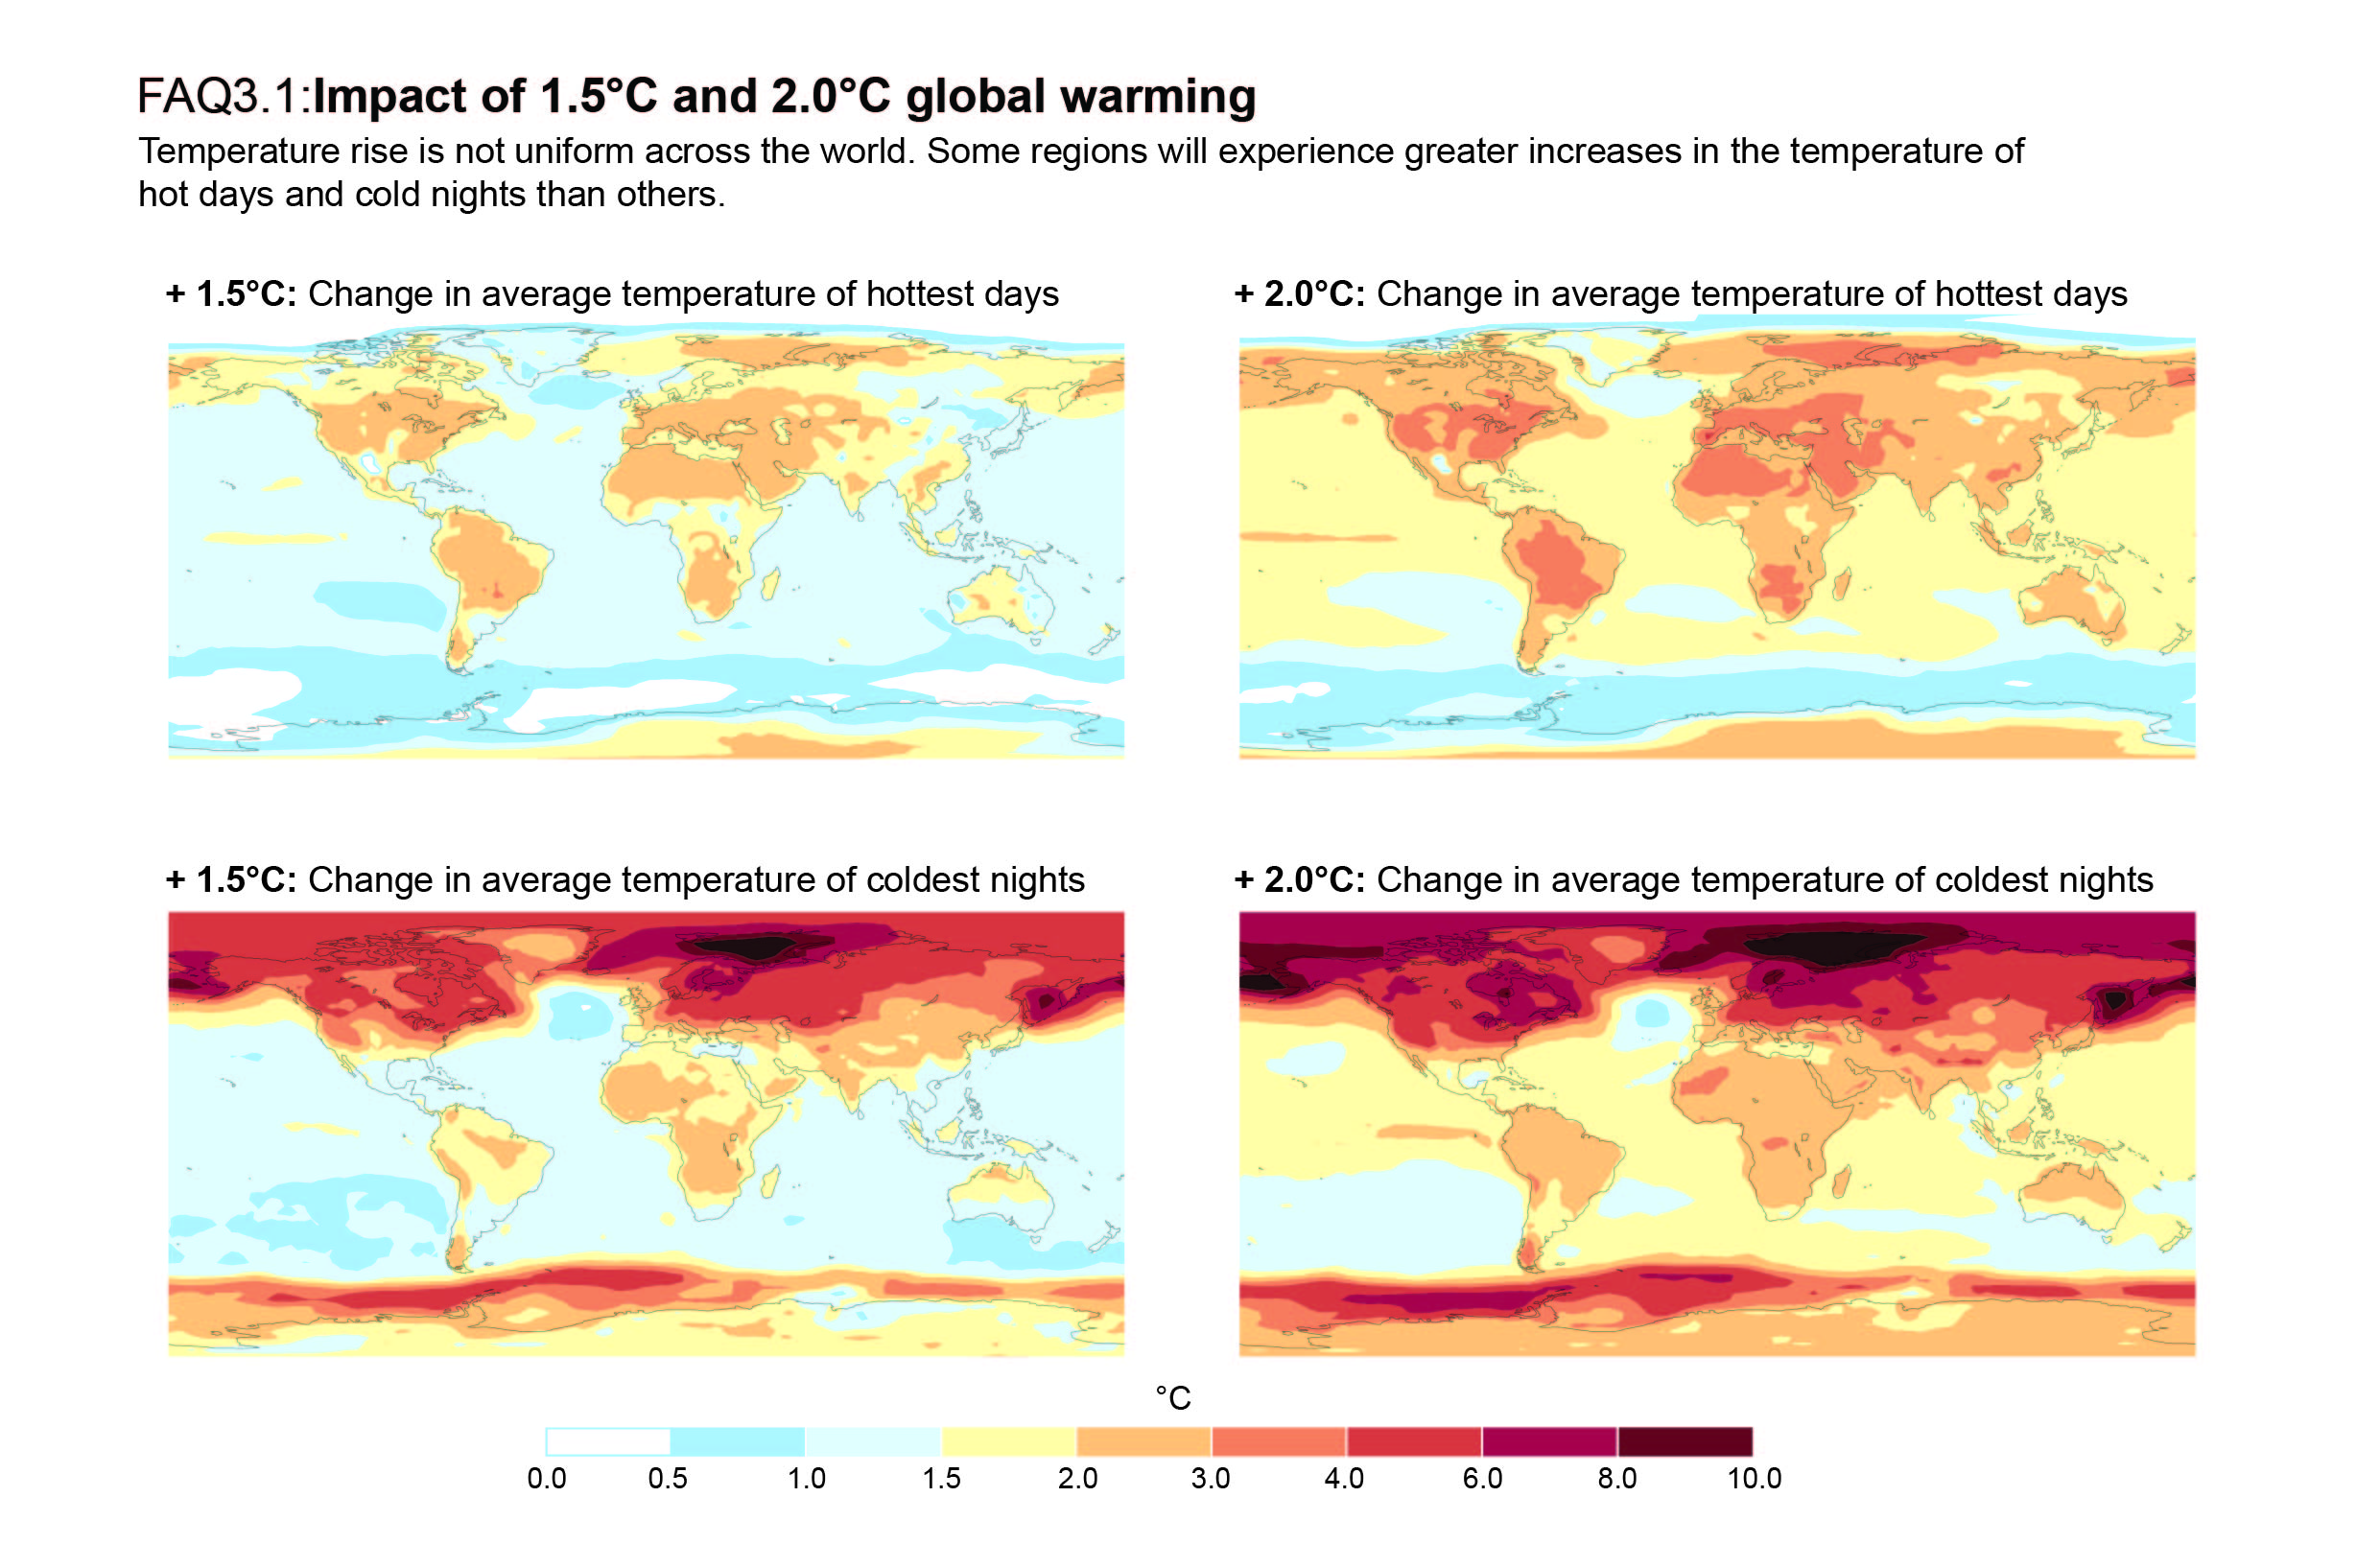 Chapter 3 — Global Warming of 1.5 ºC